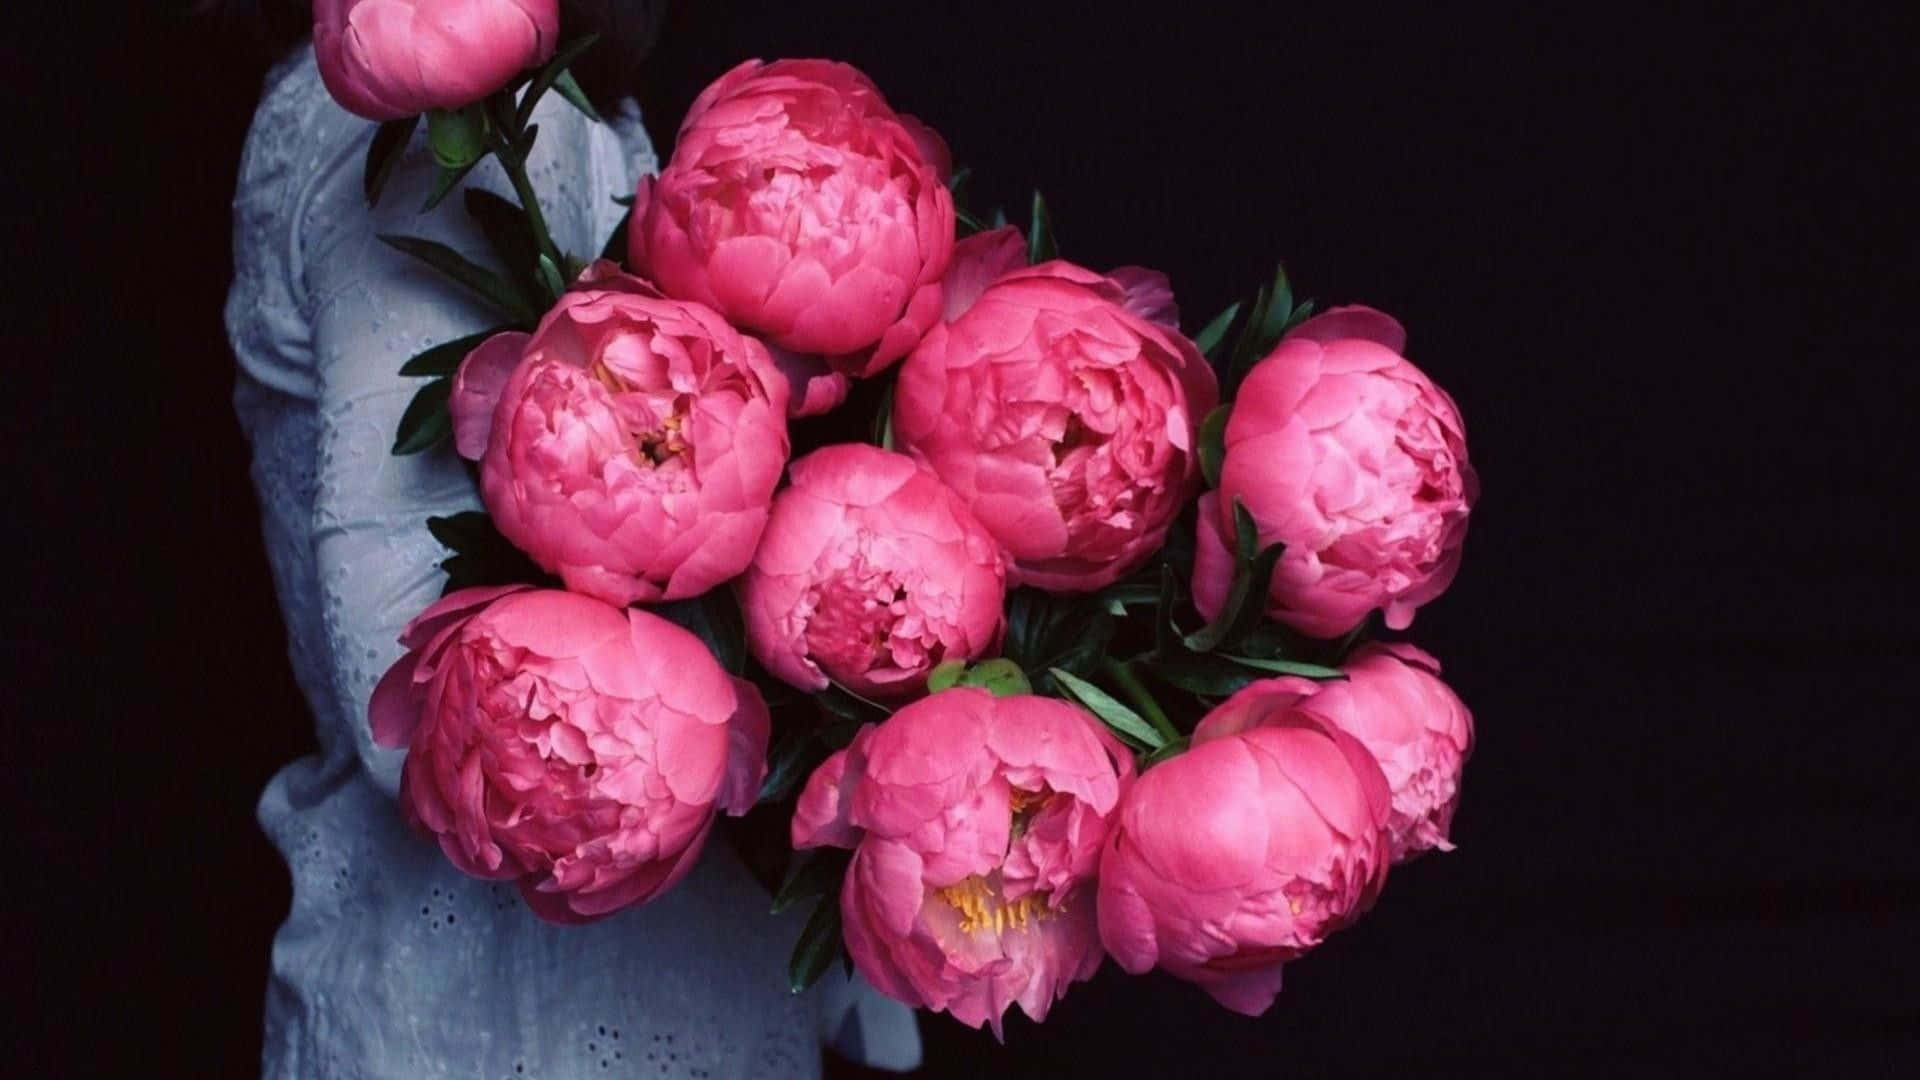 Colorful Blooms of Peonies Make a Beautiful Backdrop